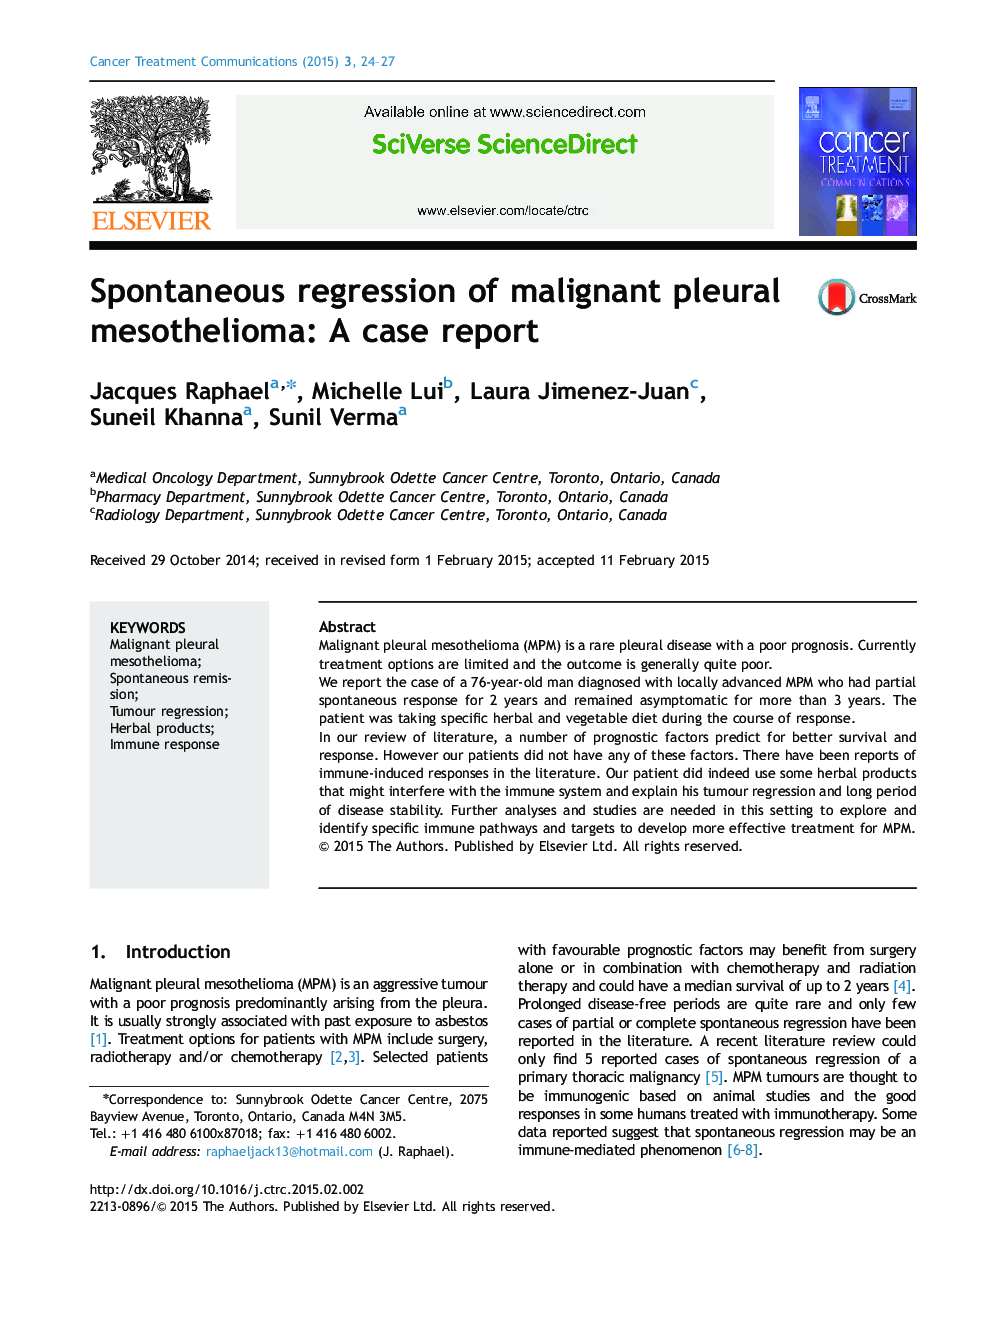 Spontaneous regression of malignant pleural mesothelioma: A case report